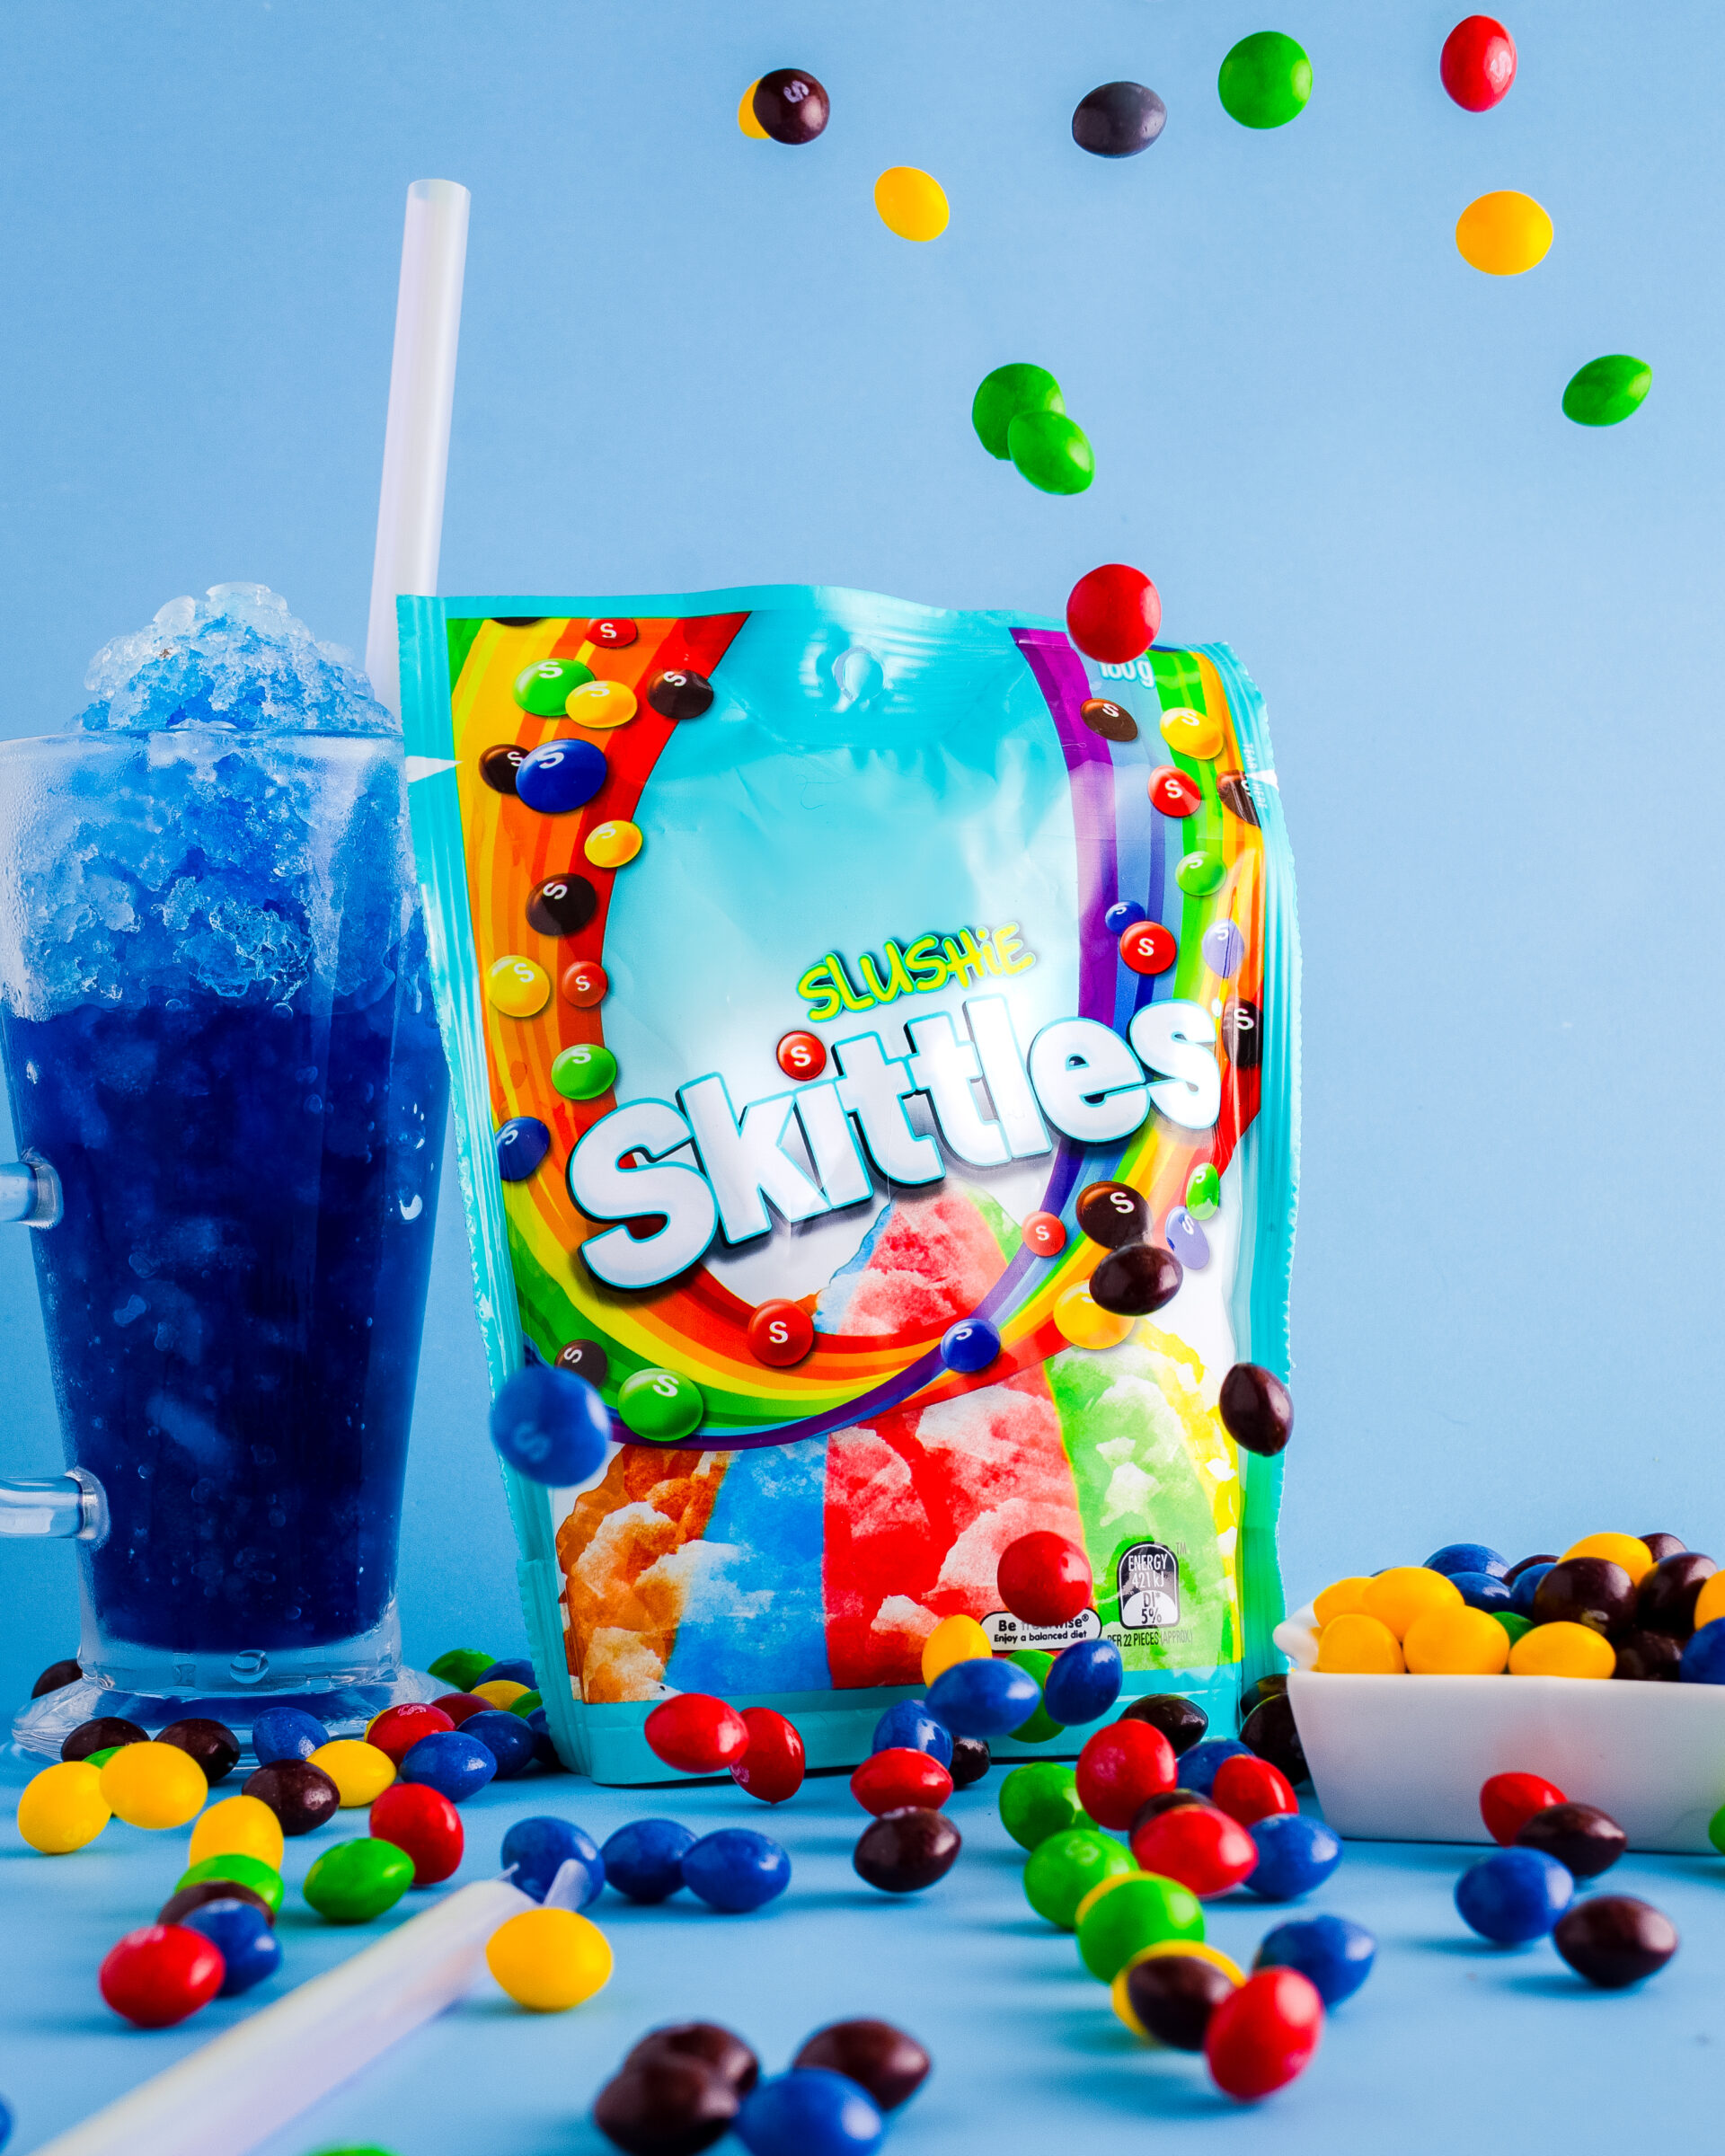 Slushie skittles package with skittles raining down, and blue slushie in the background.